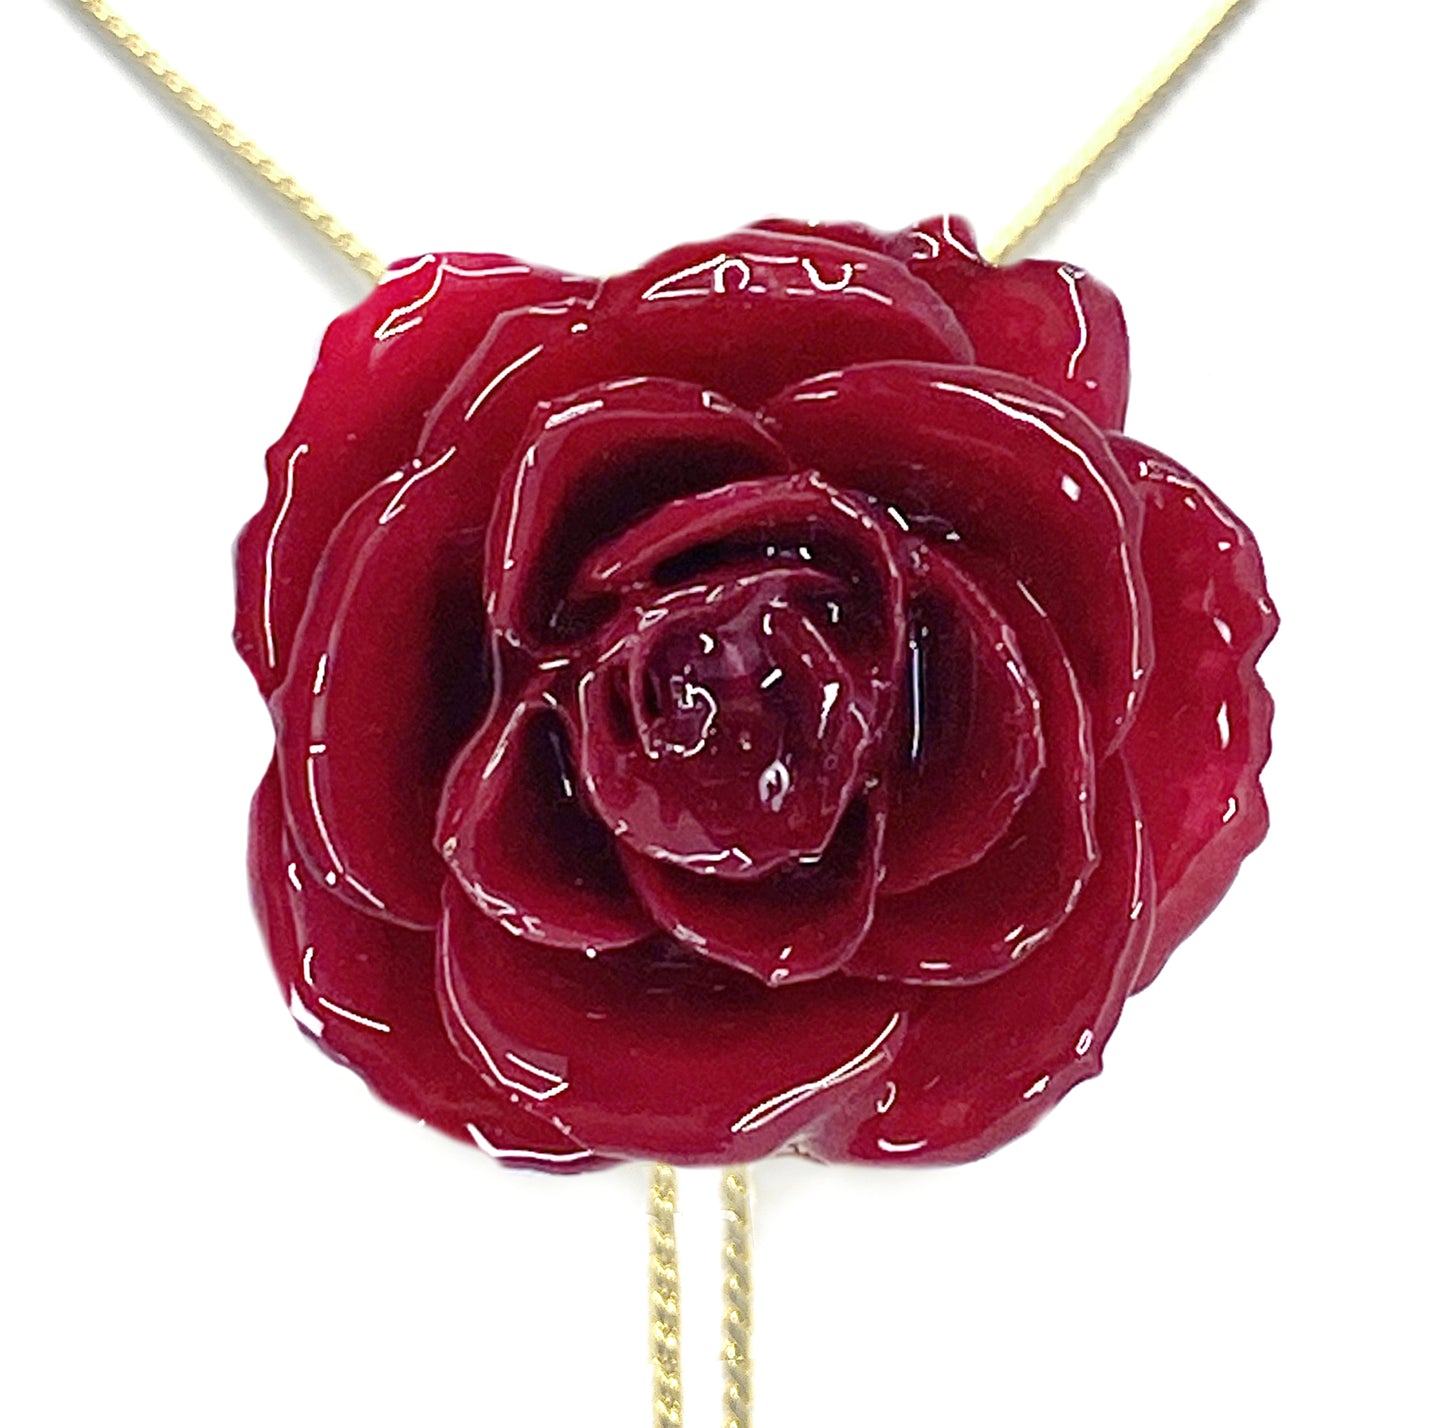 Mini Rose Mini 1.5-2.25 inch Pendant Necklace 18 inch Gold Plated 24K (Red)